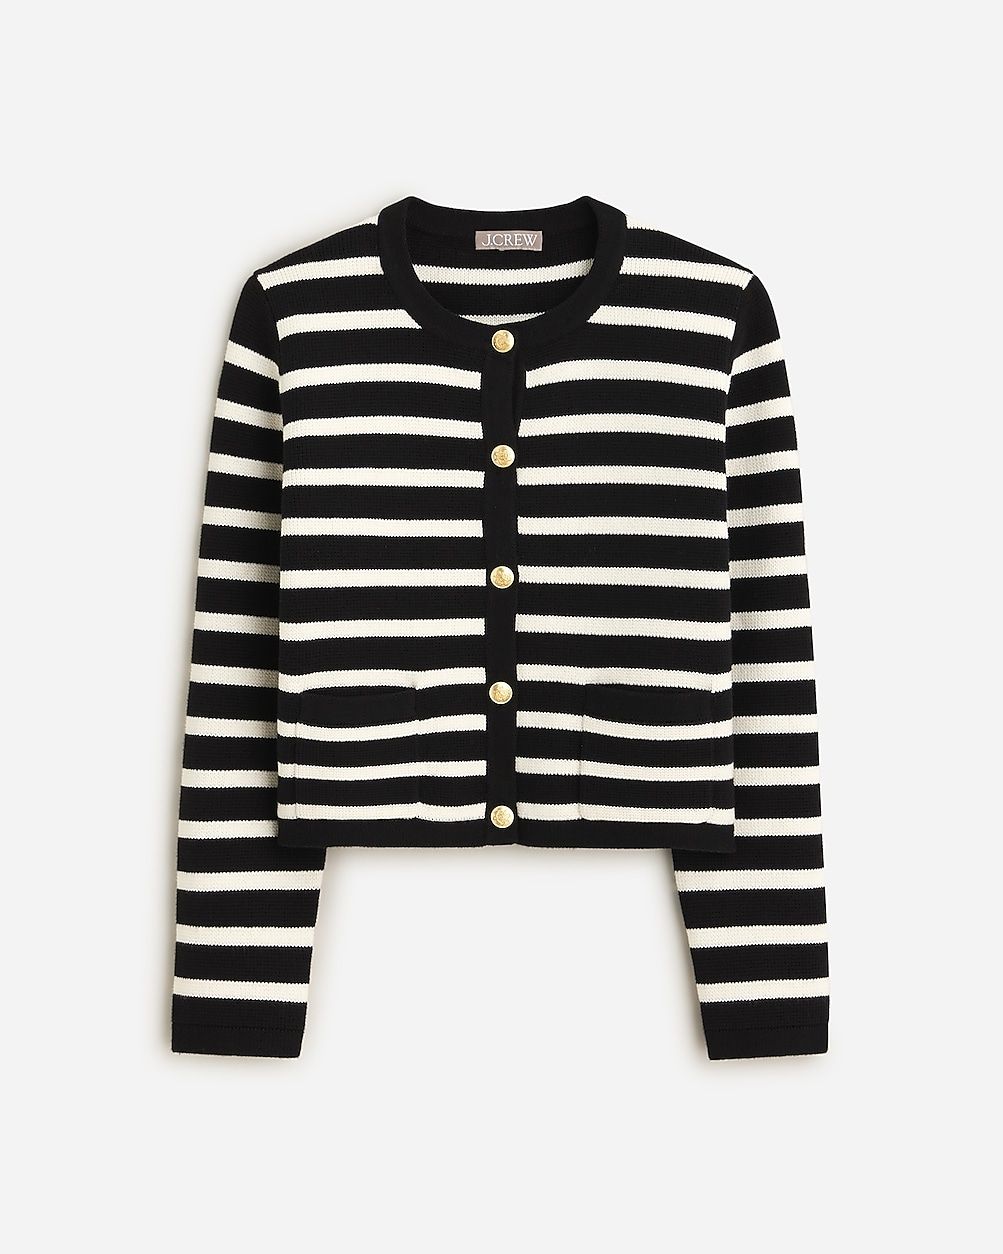 best seller4.7(672 REVIEWS)Emilie sweater lady jacket in stripe$109.50$138.00 (21% Off)Limited ti... | J.Crew US